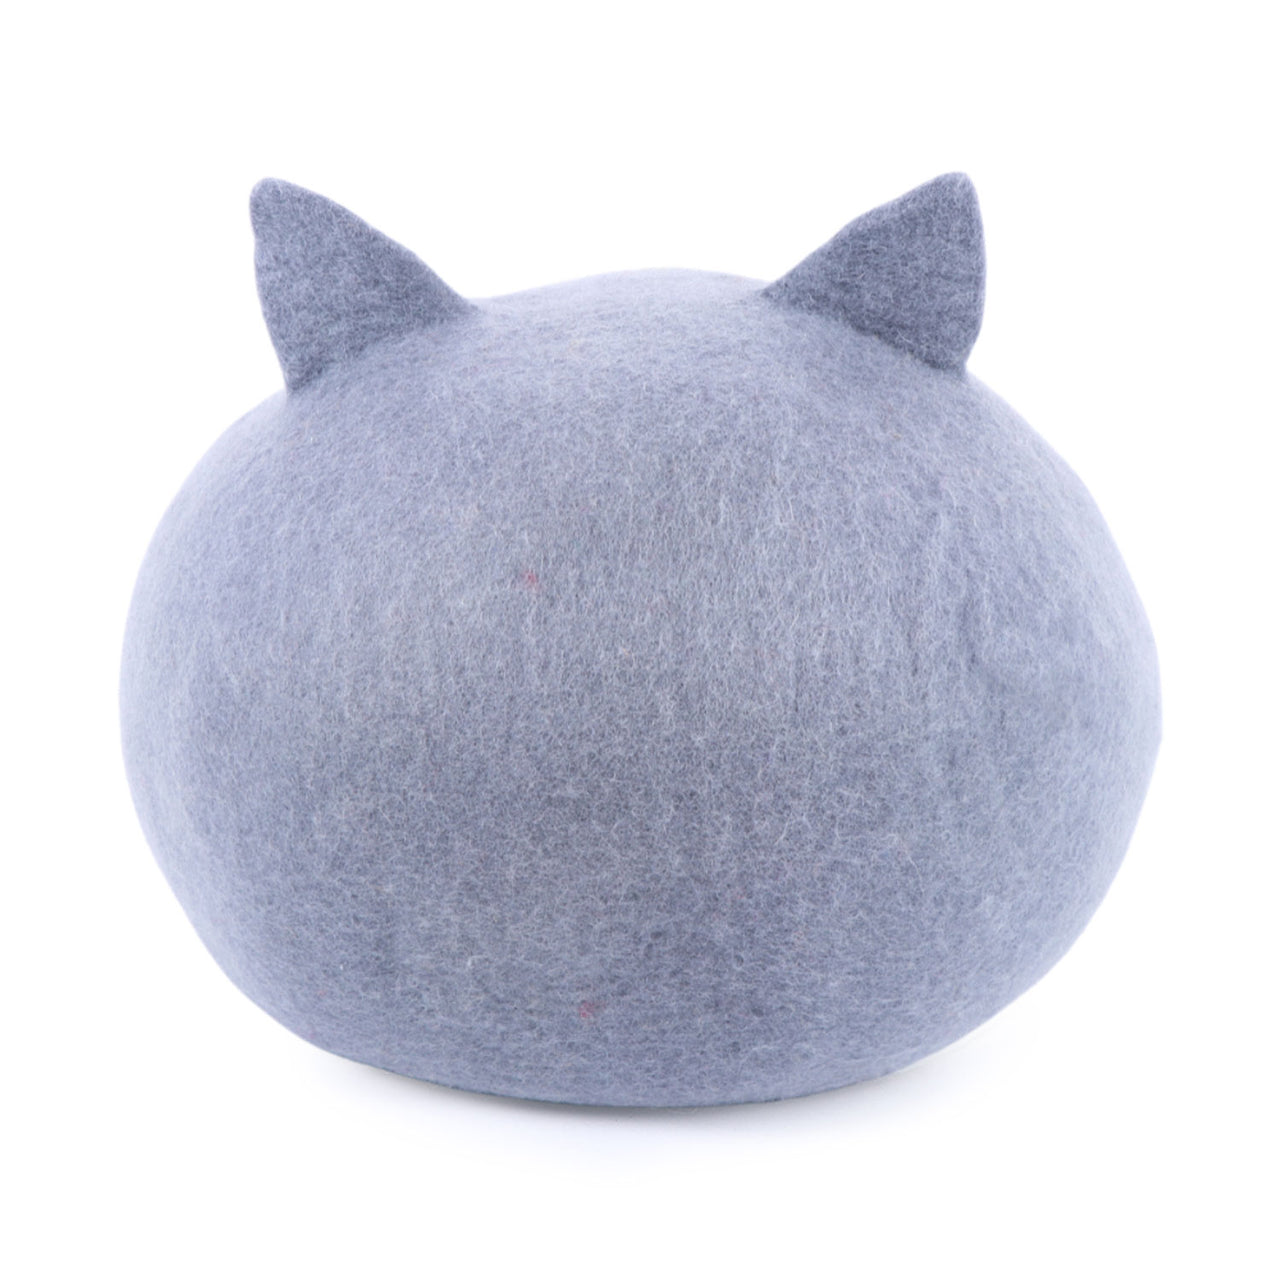 Cat Faced Round Cat House, Felt Cat Cave, Felted Wool Cat Cave Bed